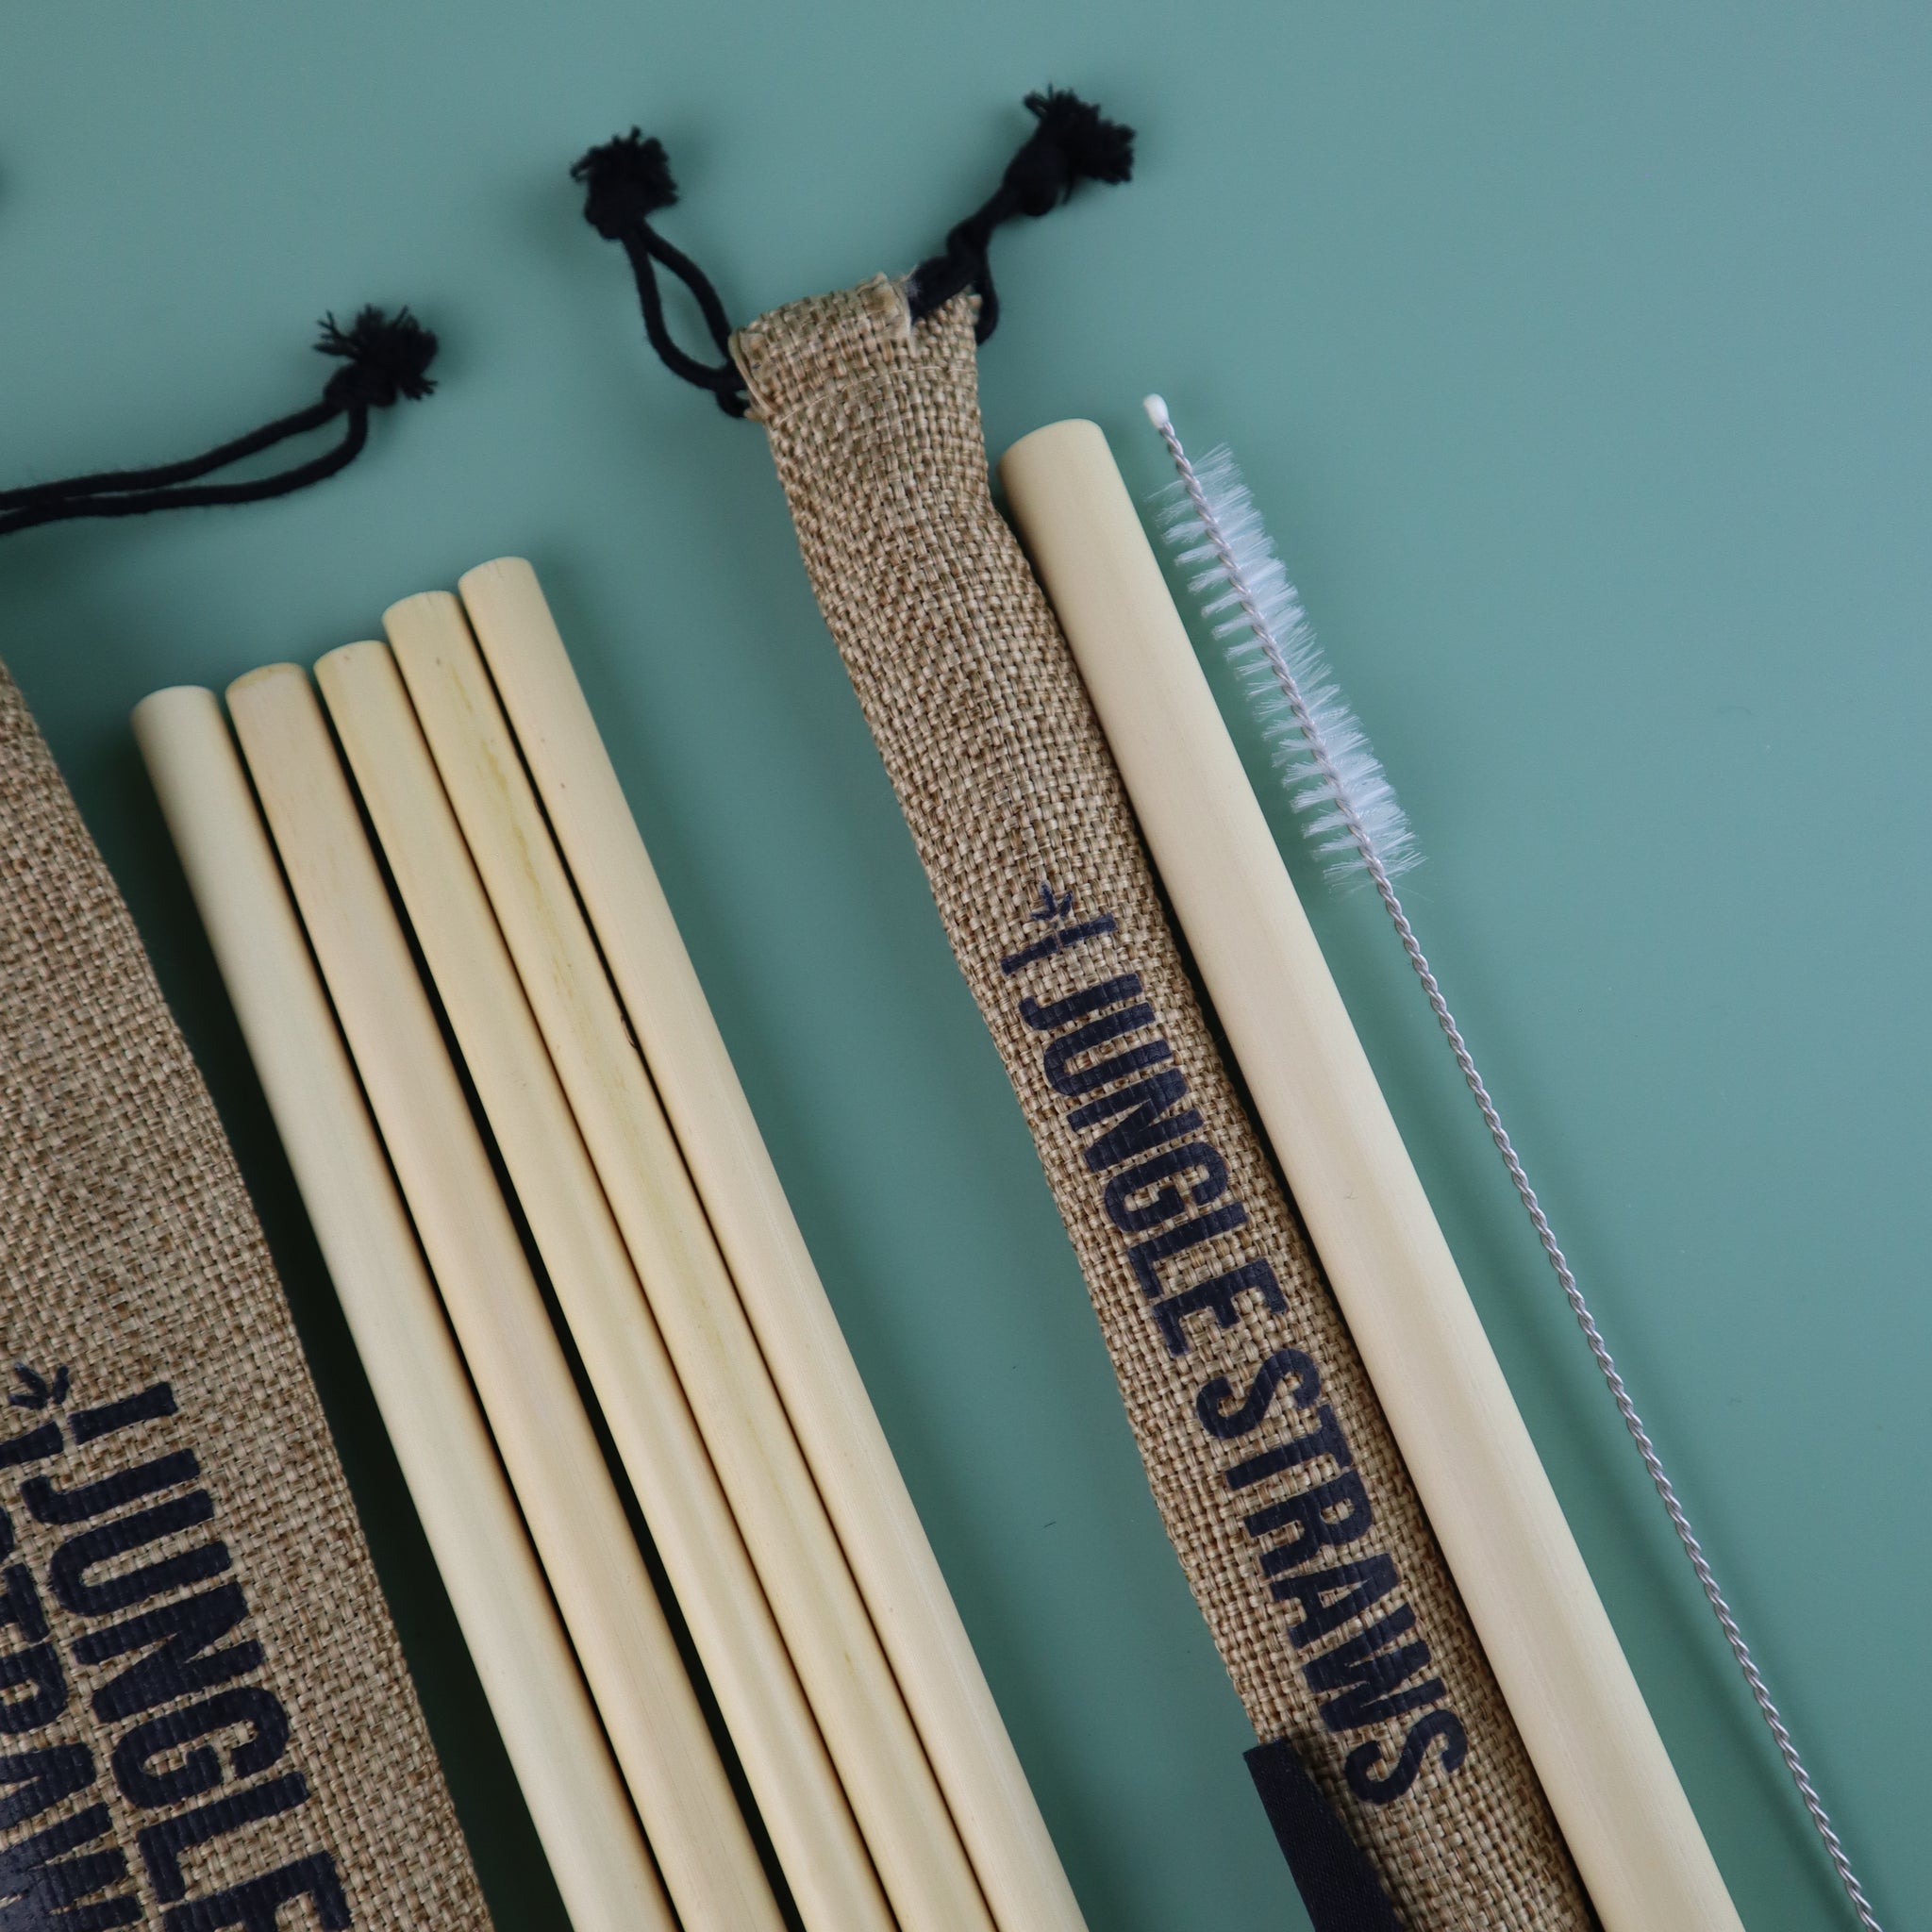 JUNGLE CULTURE BAMBOO REUSABLE STRAWS 10 PIECES SET (INCLUDES BOBA STRAW + CLEANING BRUSH)